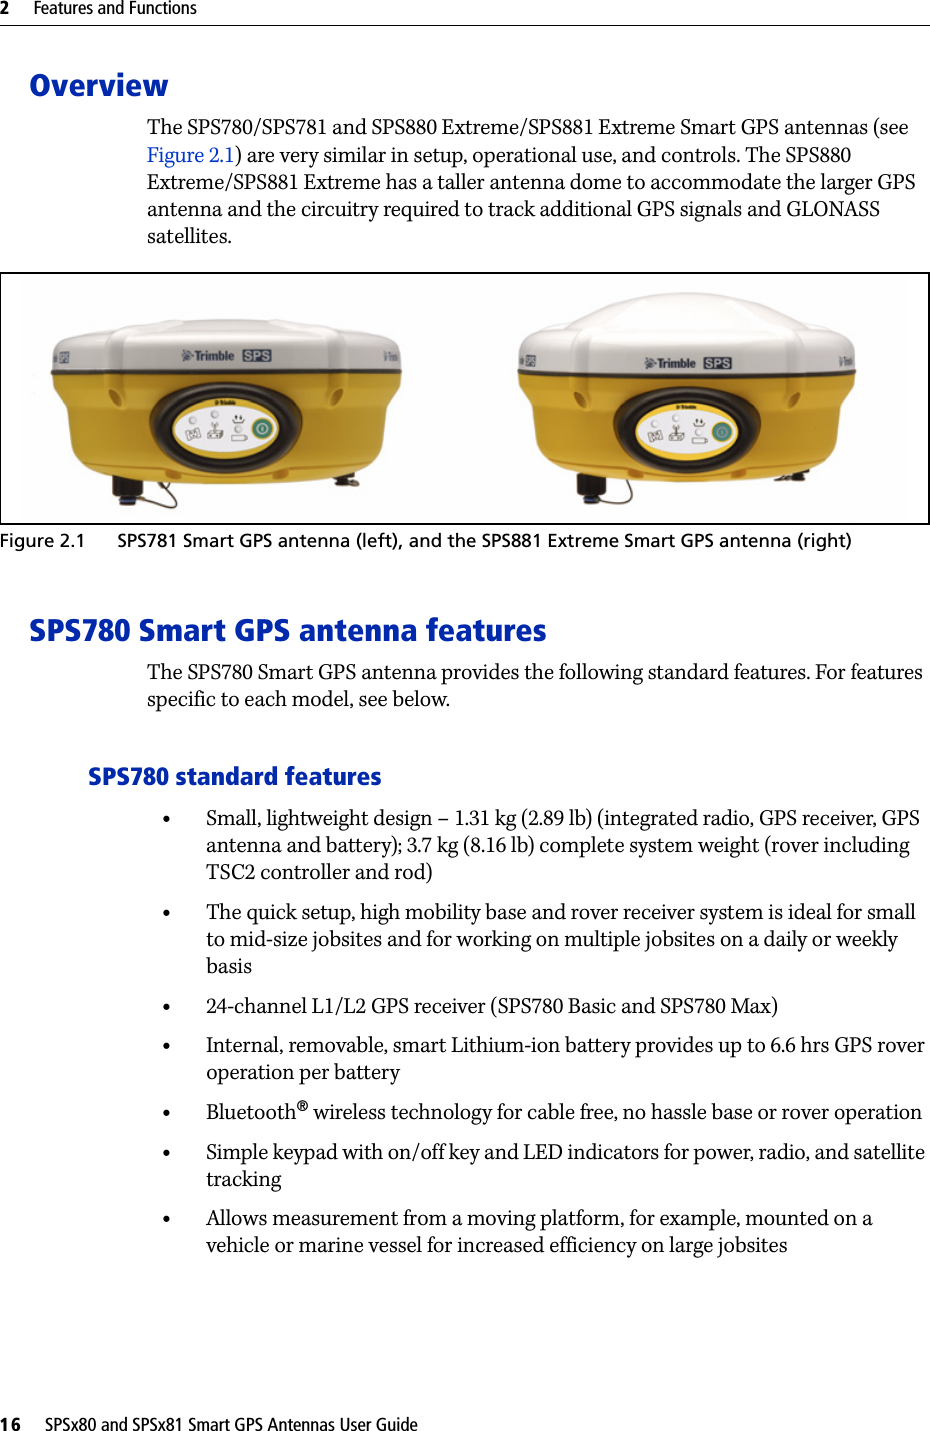 2     Features and Functions16     SPSx80 and SPSx81 Smart GPS Antennas User GuideOverviewThe SPS780/SPS781 and SPS880 Extreme/SPS881 Extreme Smart GPS antennas (see Figure 2.1) are very similar in setup, operational use, and controls. The SPS880 Extreme/SPS881 Extreme has a taller antenna dome to accommodate the larger GPS antenna and the circuitry required to track additional GPS signals and GLONASS satellites.  Figure 2.1 SPS781 Smart GPS antenna (left), and the SPS881 Extreme Smart GPS antenna (right)SPS780 Smart GPS antenna featuresThe SPS780 Smart GPS antenna provides the following standard features. For features specific to each model, see below.SPS780 standard features•Small, lightweight design – 1.31 kg (2.89 lb) (integrated radio, GPS receiver, GPS antenna and battery); 3.7 kg (8.16 lb) complete system weight (rover including TSC2 controller and rod)•The quick setup, high mobility base and rover receiver system is ideal for small to mid-size jobsites and for working on multiple jobsites on a daily or weekly basis•24-channel L1/L2 GPS receiver (SPS780 Basic and SPS780 Max)•Internal, removable, smart Lithium-ion battery provides up to 6.6 hrs GPS rover operation per battery•Bluetooth® wireless technology for cable free, no hassle base or rover operation•Simple keypad with on/off key and LED indicators for power, radio, and satellite tracking•Allows measurement from a moving platform, for example, mounted on a vehicle or marine vessel for increased efficiency on large jobsites